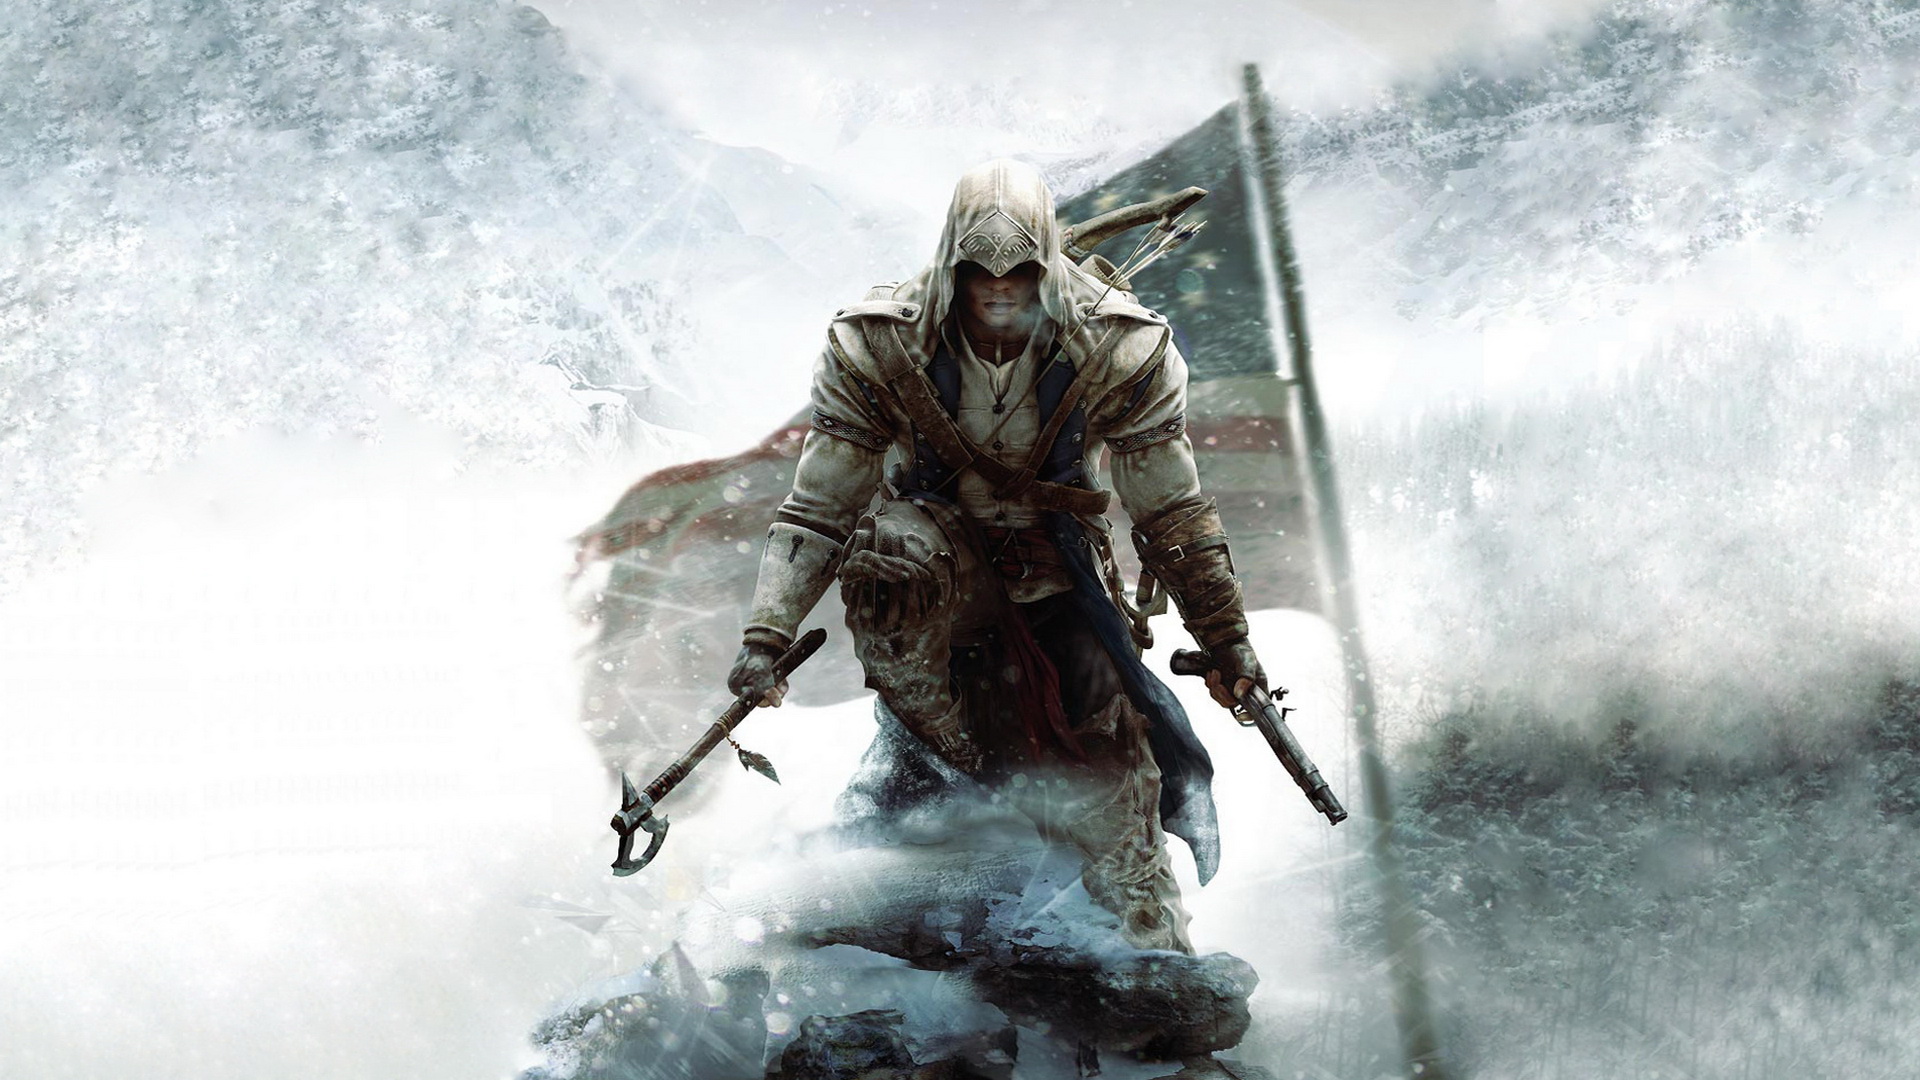 Amazing Assassin's Creed III Pictures & Backgrounds